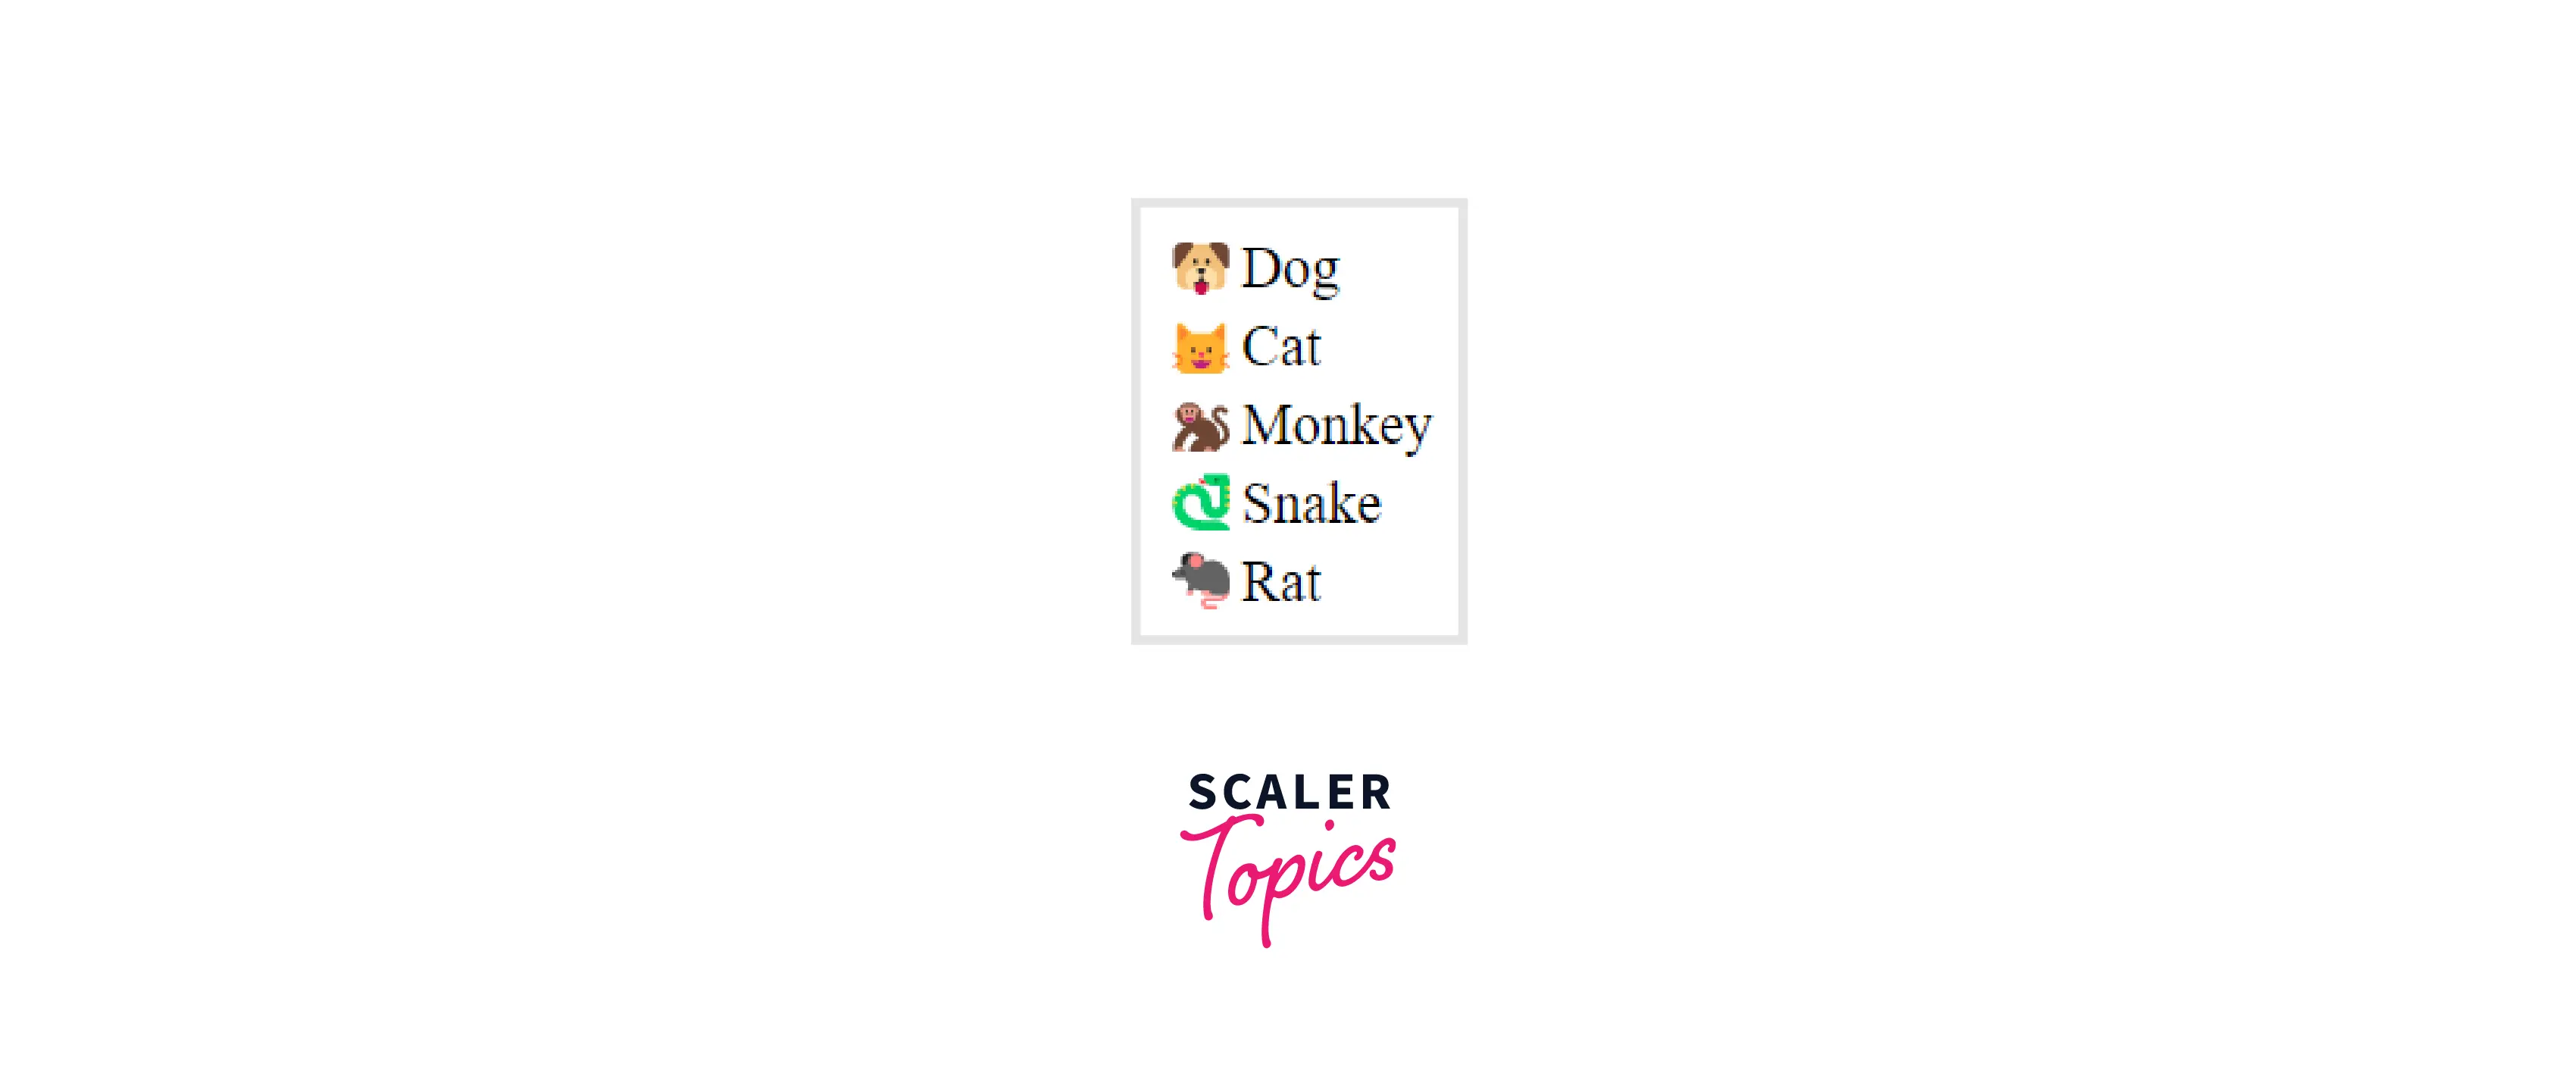 example-style-list-items-with-emojis